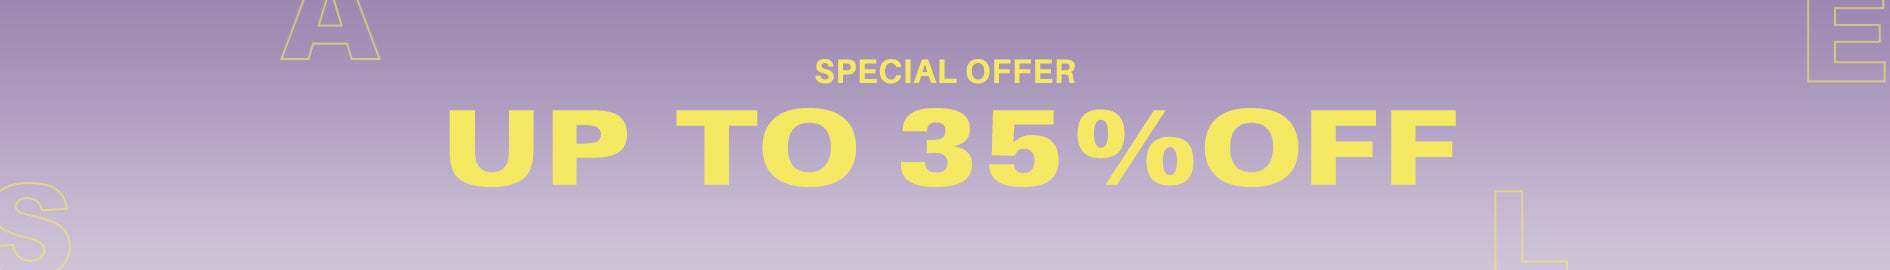 SPECIAL OFFER- UP TO 35% OFF